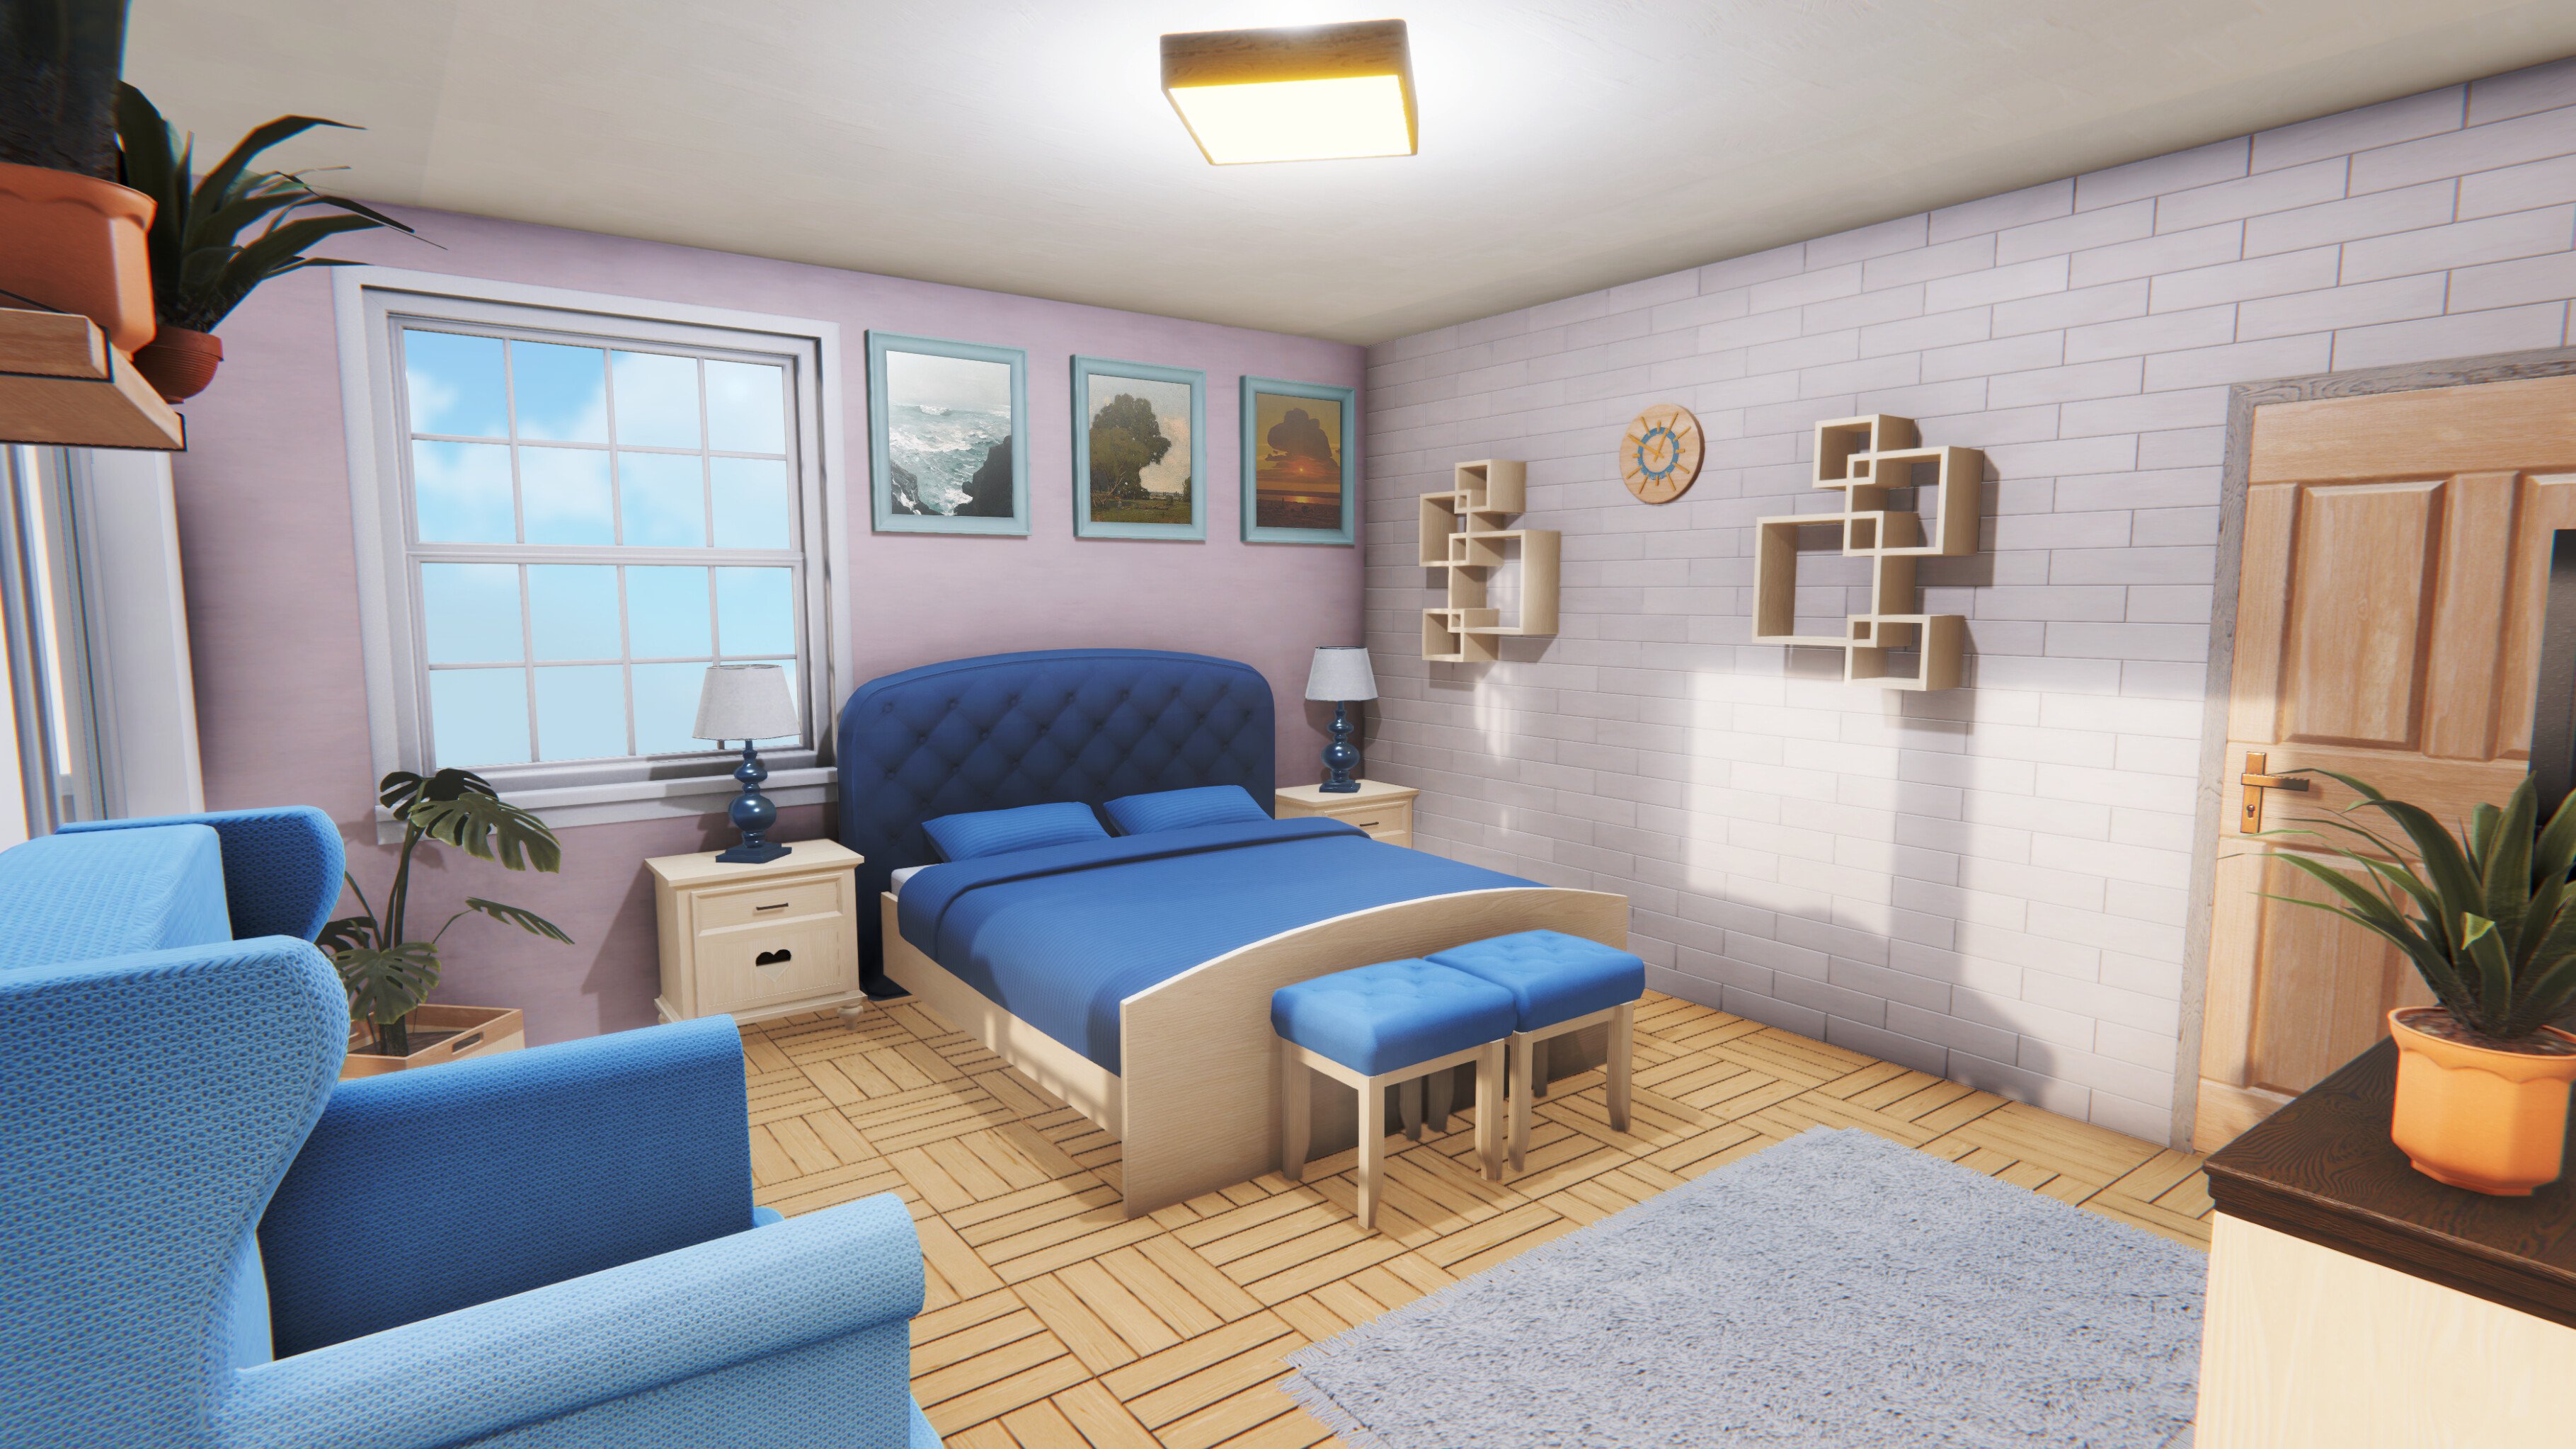 House Flipper 2 Confirmed For Ps5 Xbox Series And Pc Gameplay